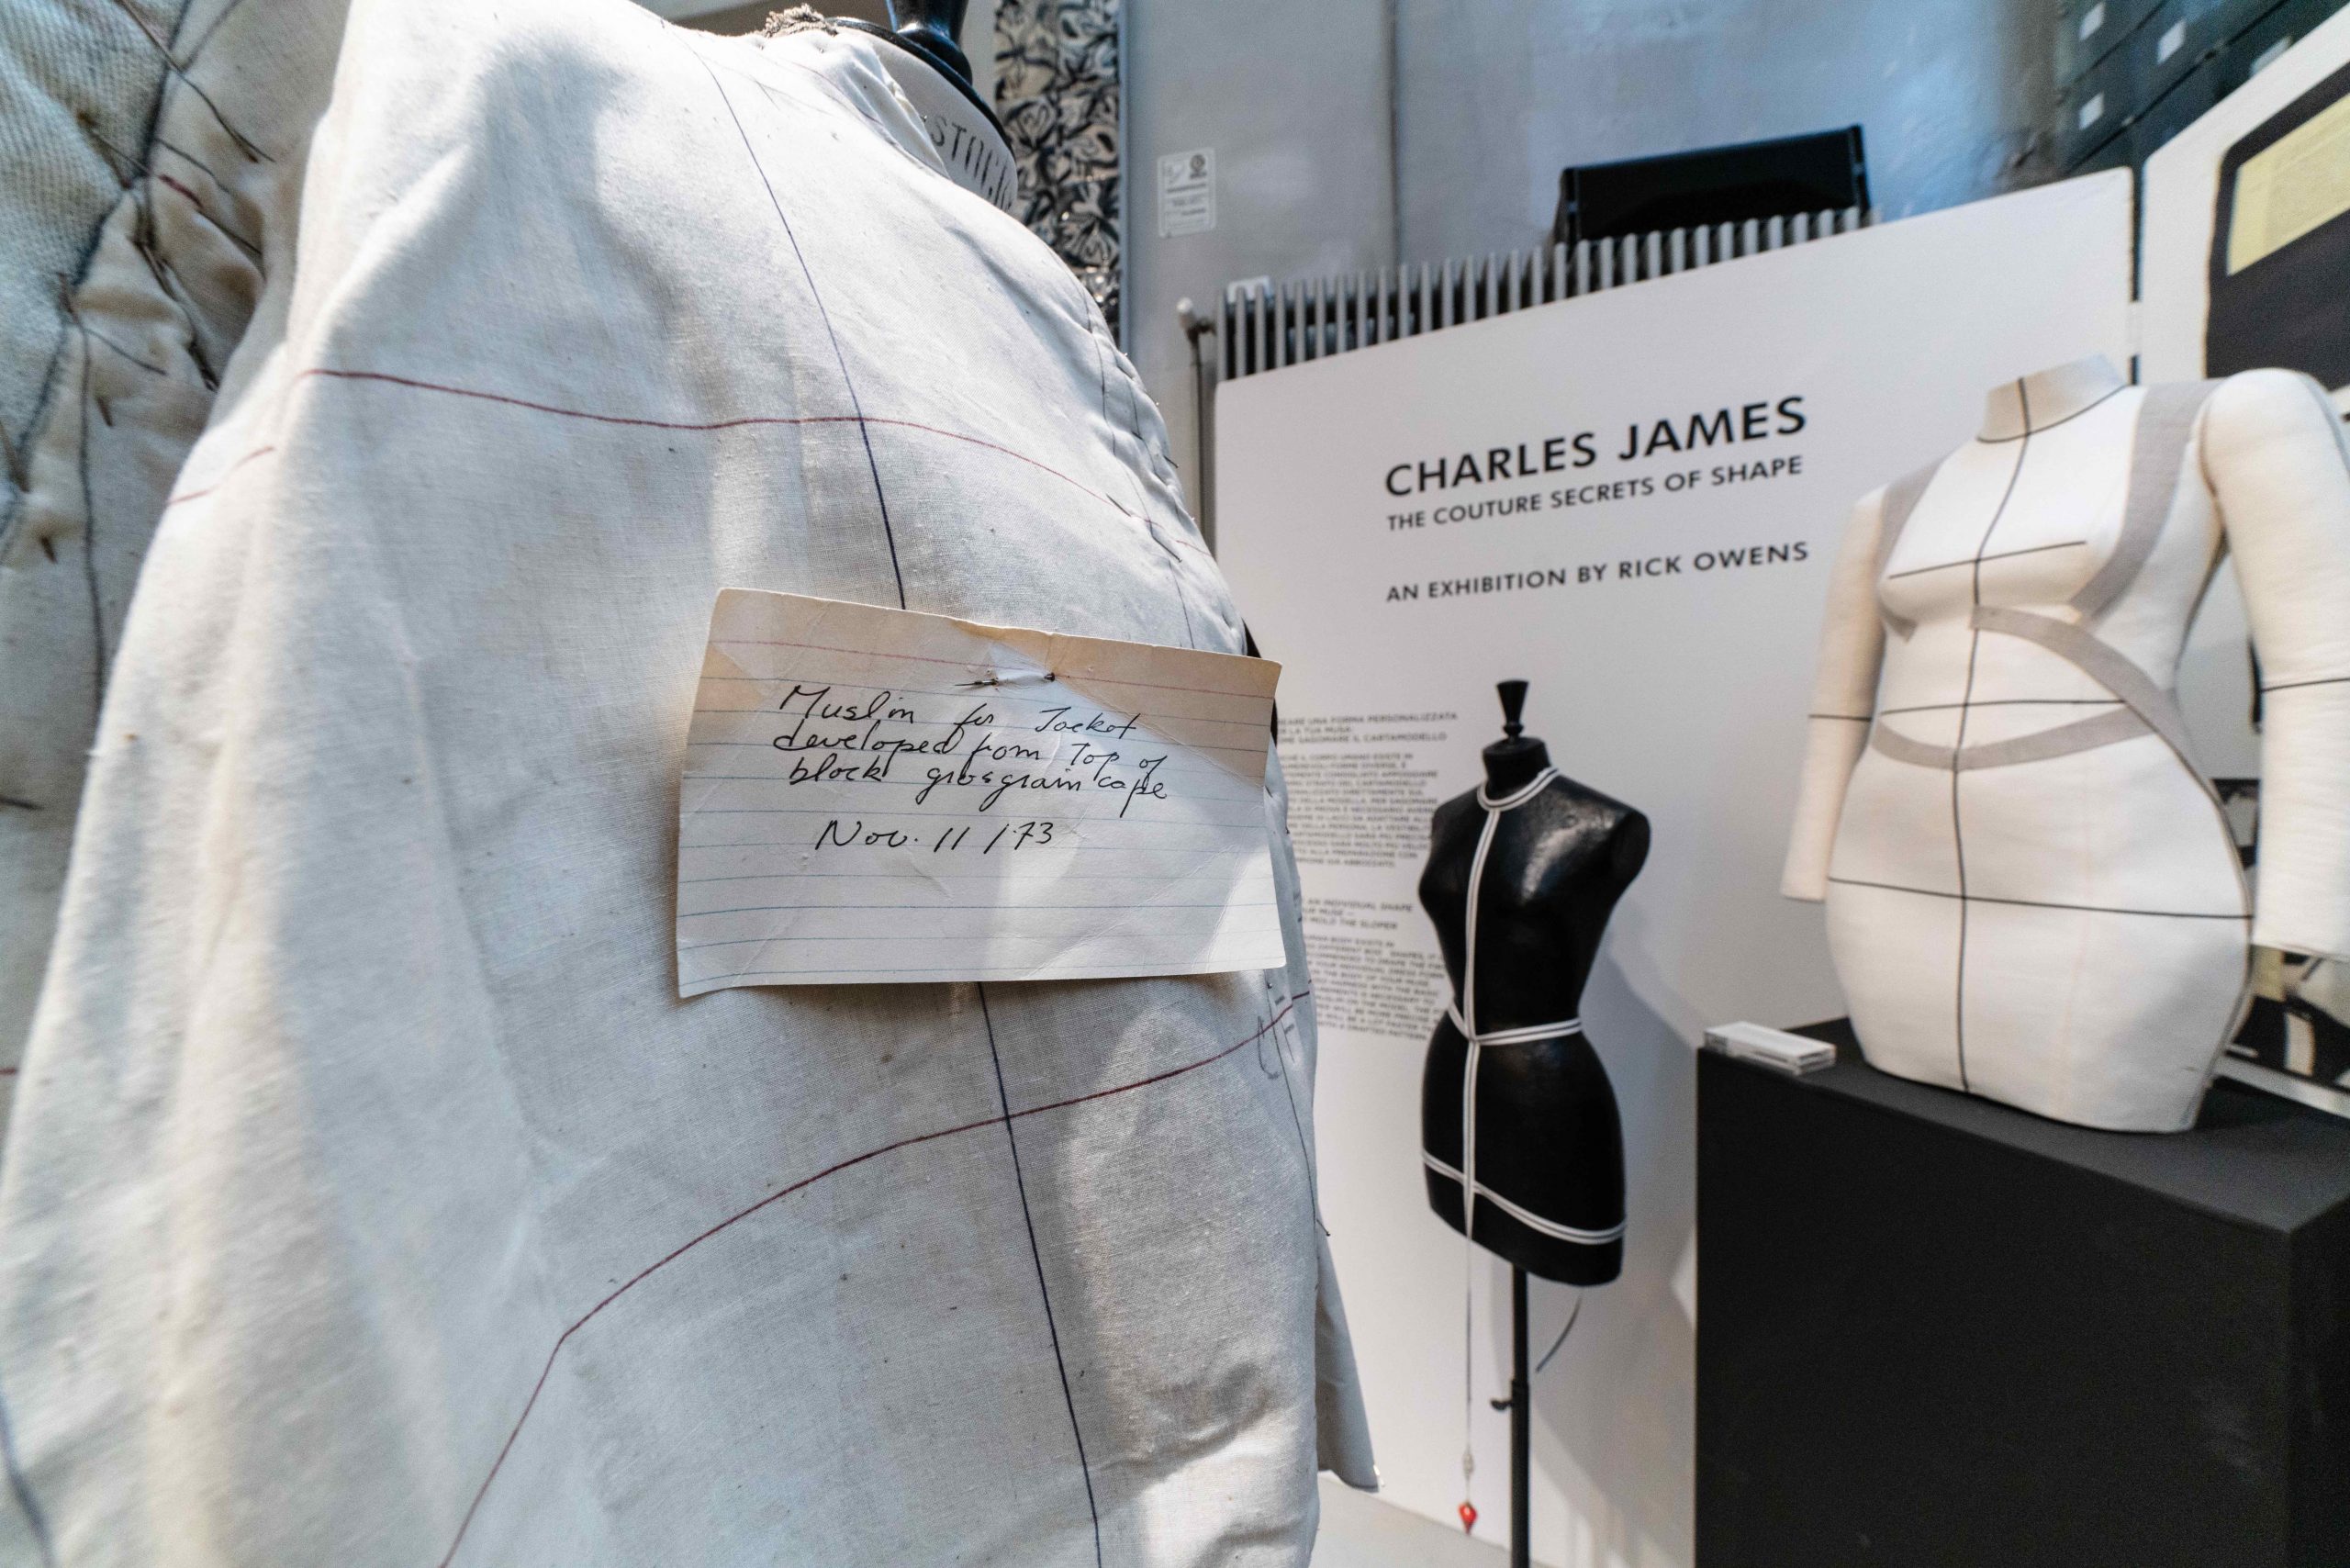 Charles James: The Couture Secrets of Shape' should be required reading for  anyone interested in the evolution of design